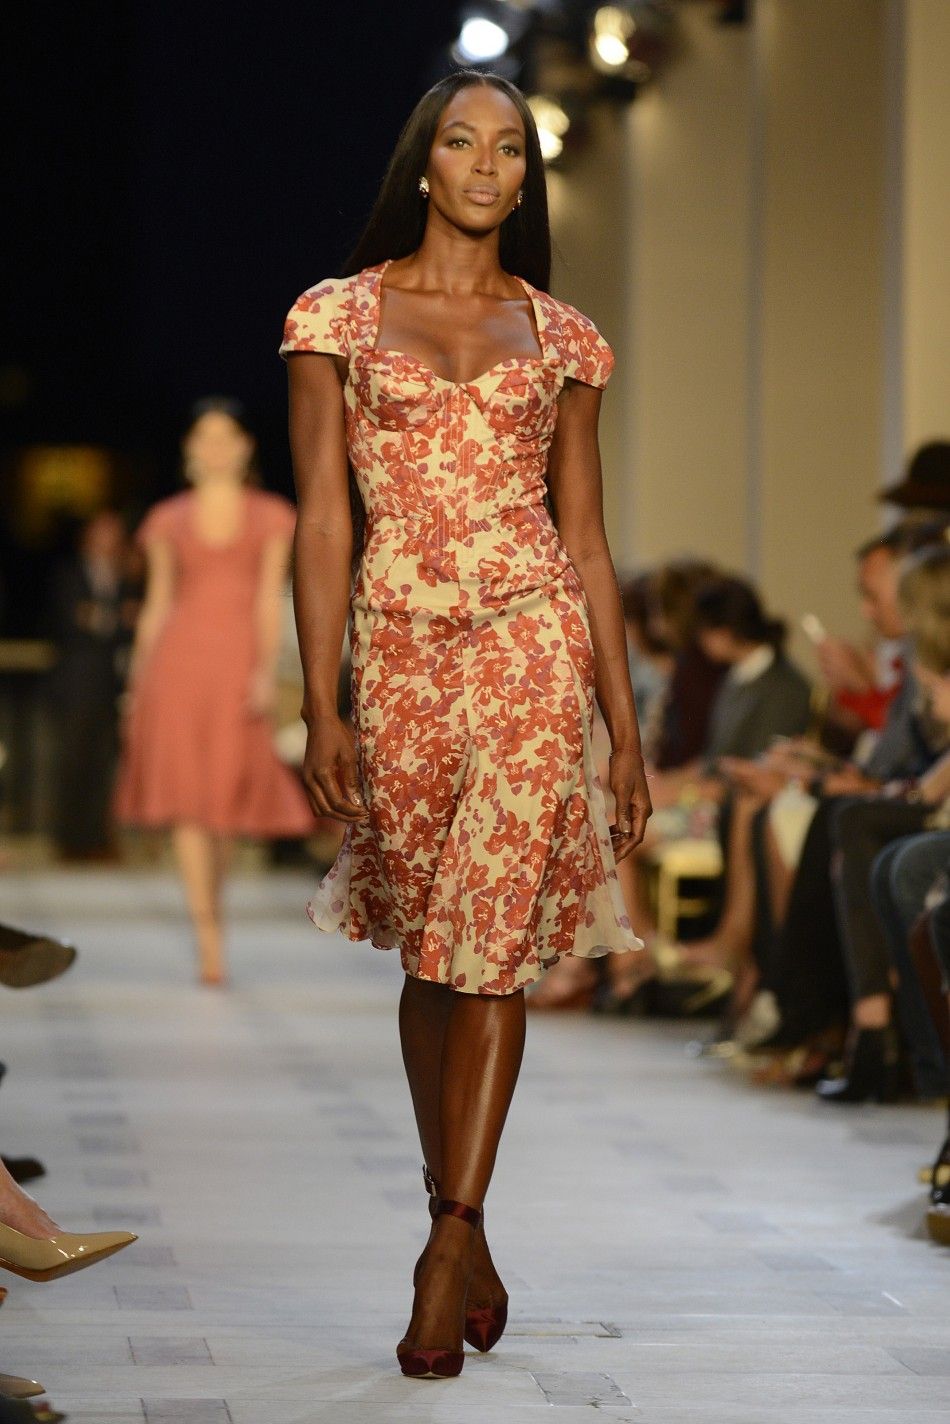 Zac Posen Spring 2013 collection at Mercedes-Benz Fashion Week in New York at Avery Fisher Hall, Sept. 9, 2012